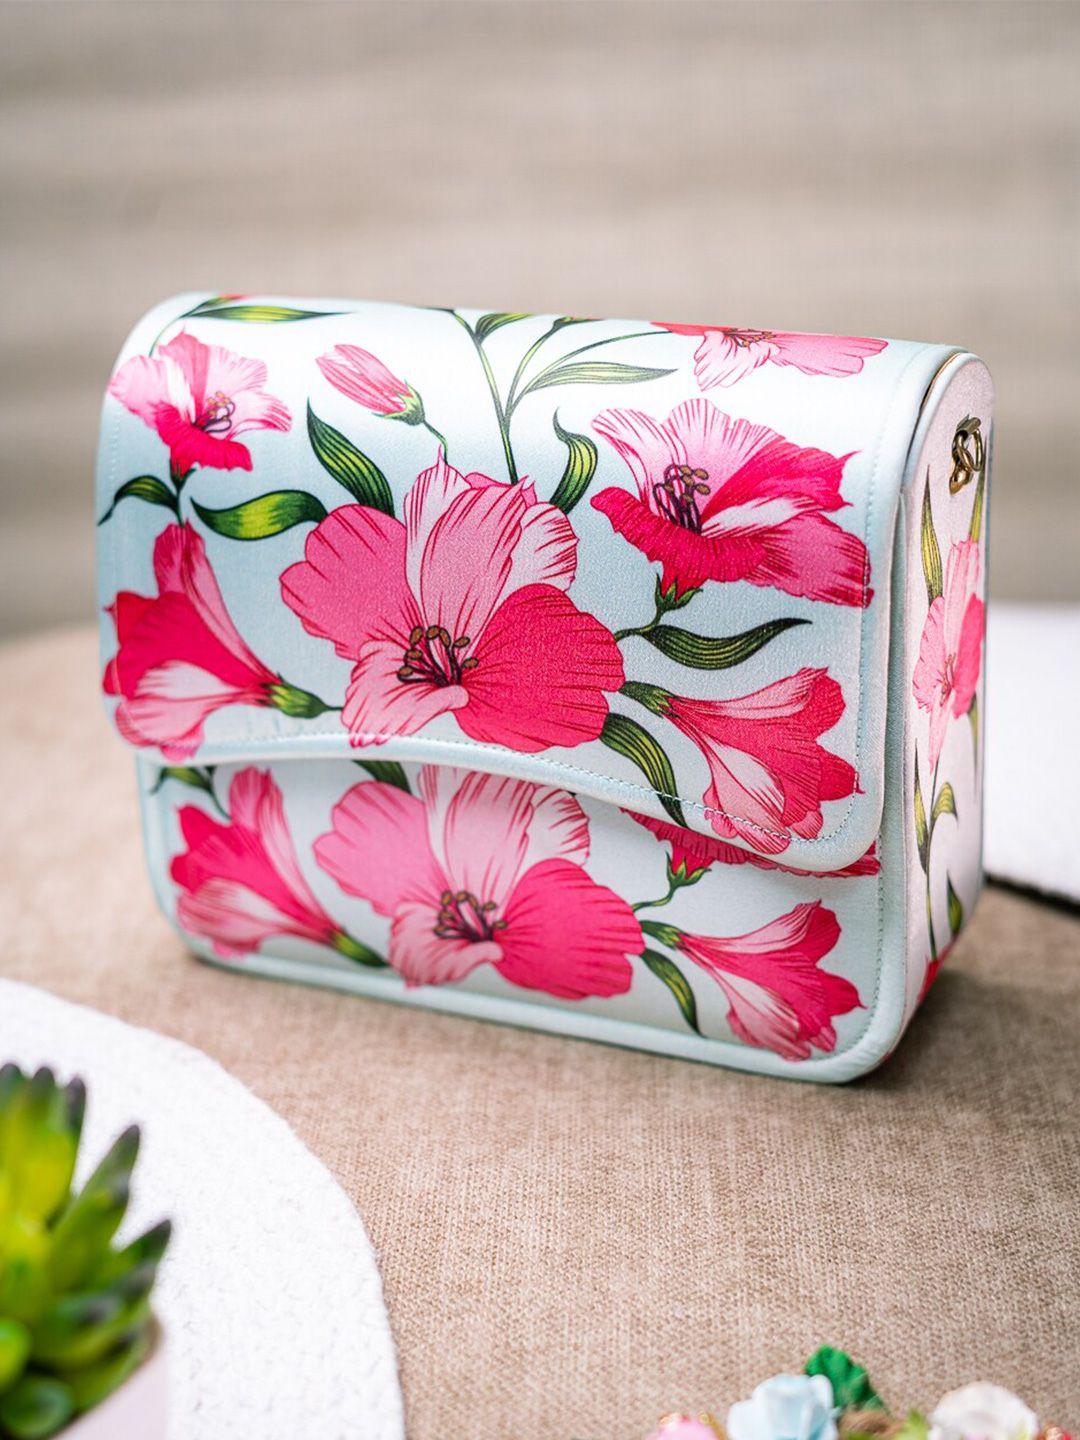 nr by nidhi rathi women floral printed fabric foldover clutch